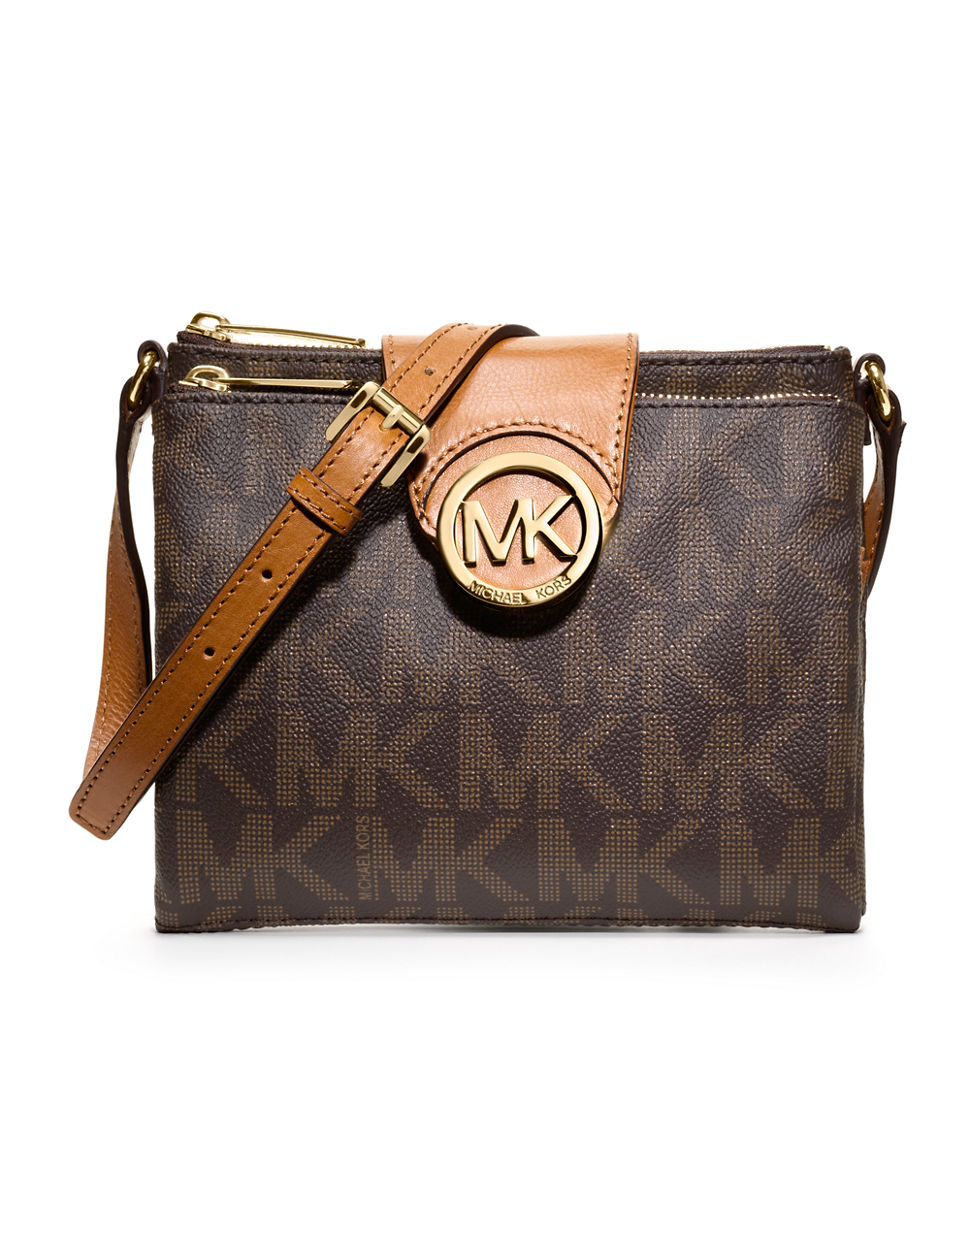 Lyst - Michael michael kors Fulton Small Saffiano Leather Messenger in Brown